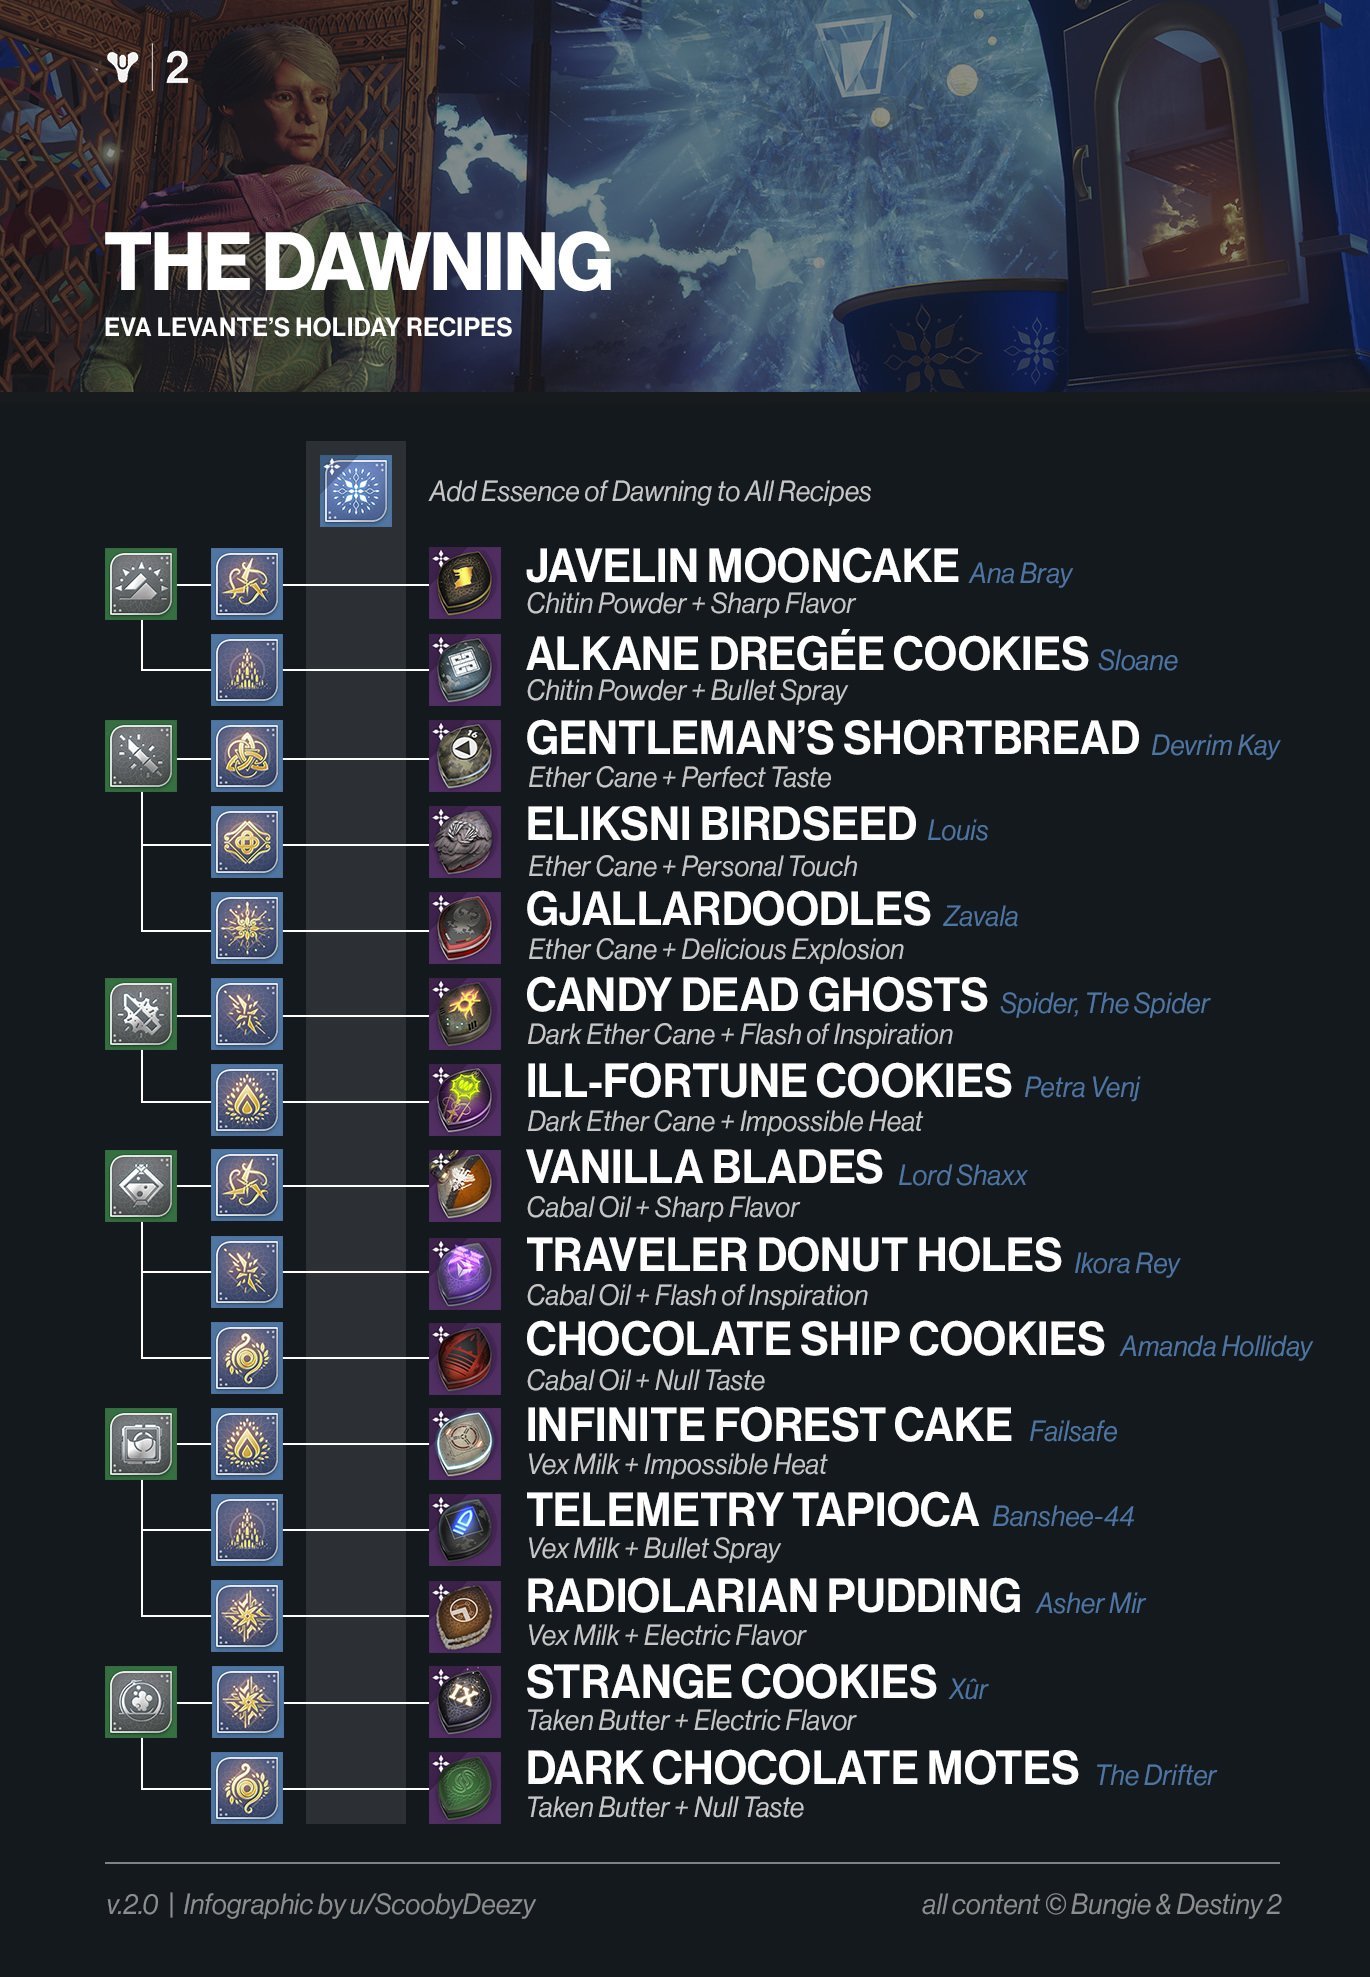 Here are all Destiny 2 'The Dawning' baking recipes ...